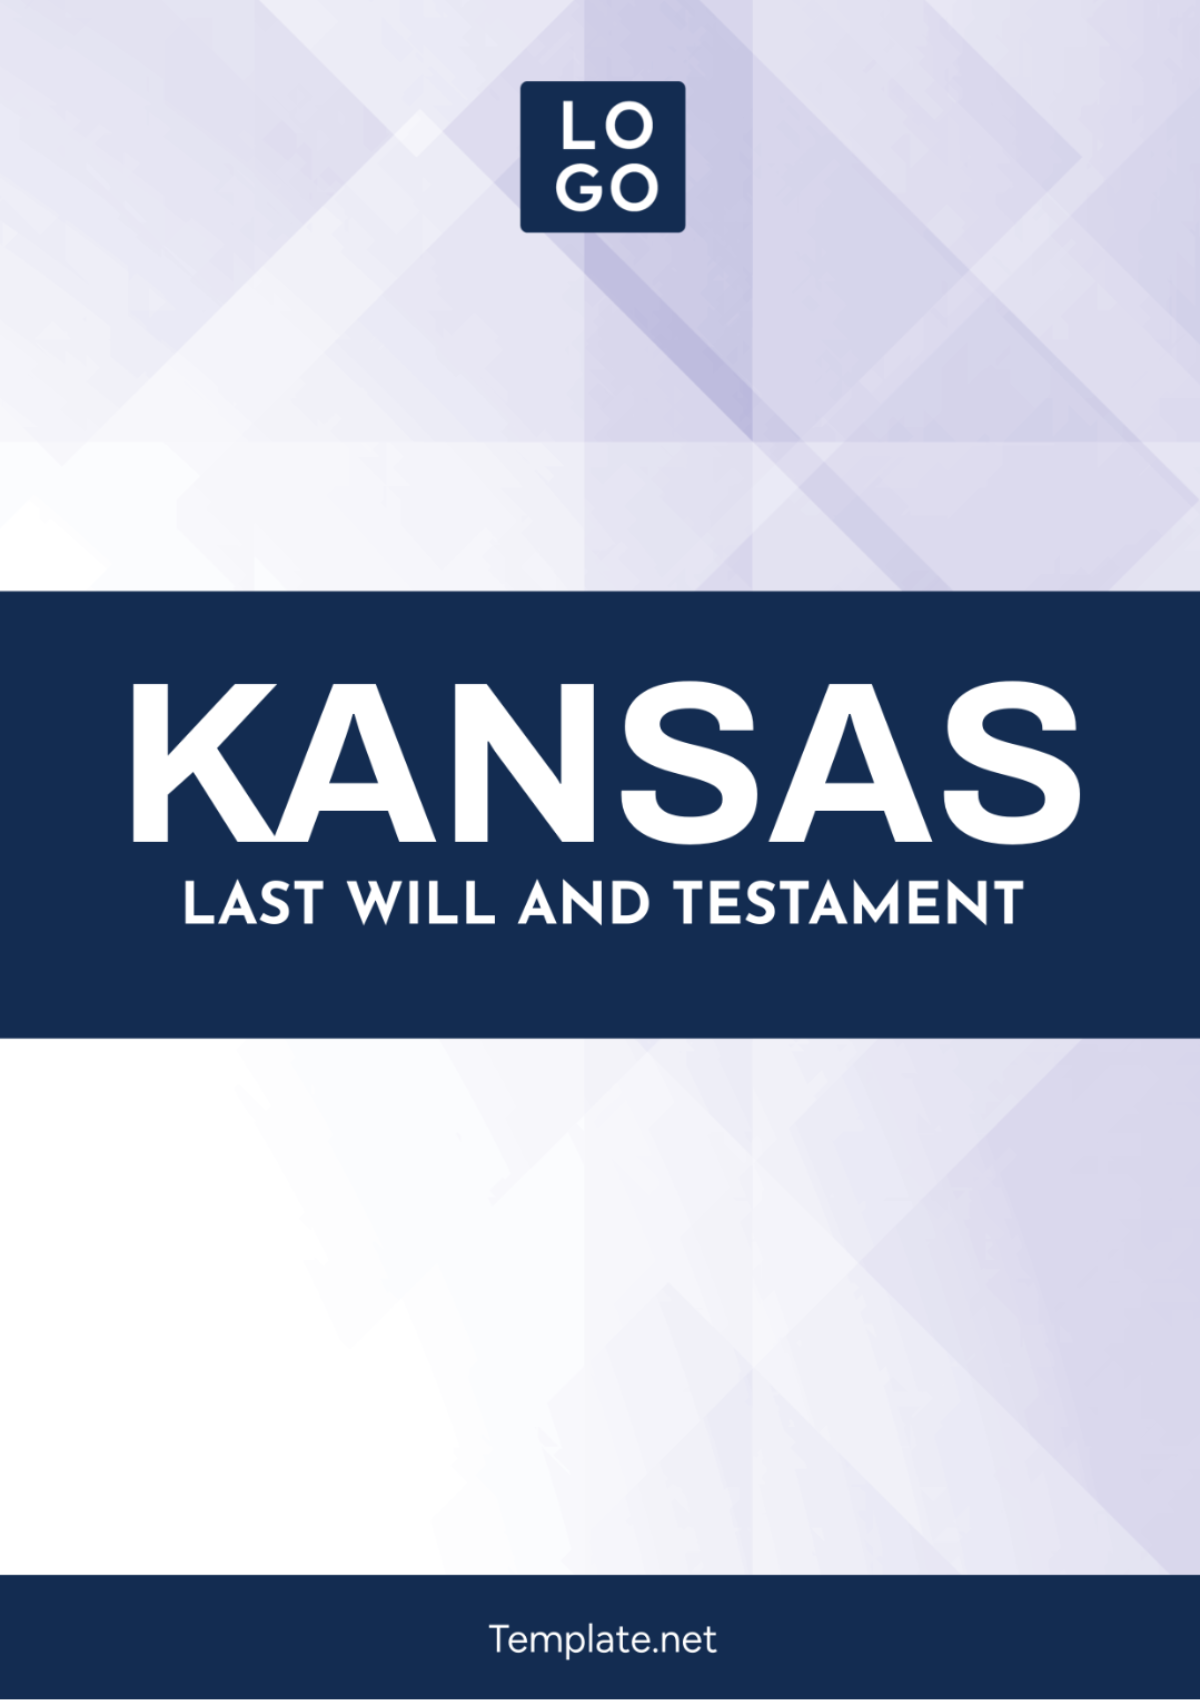 Kansas Last Will and Testament Template